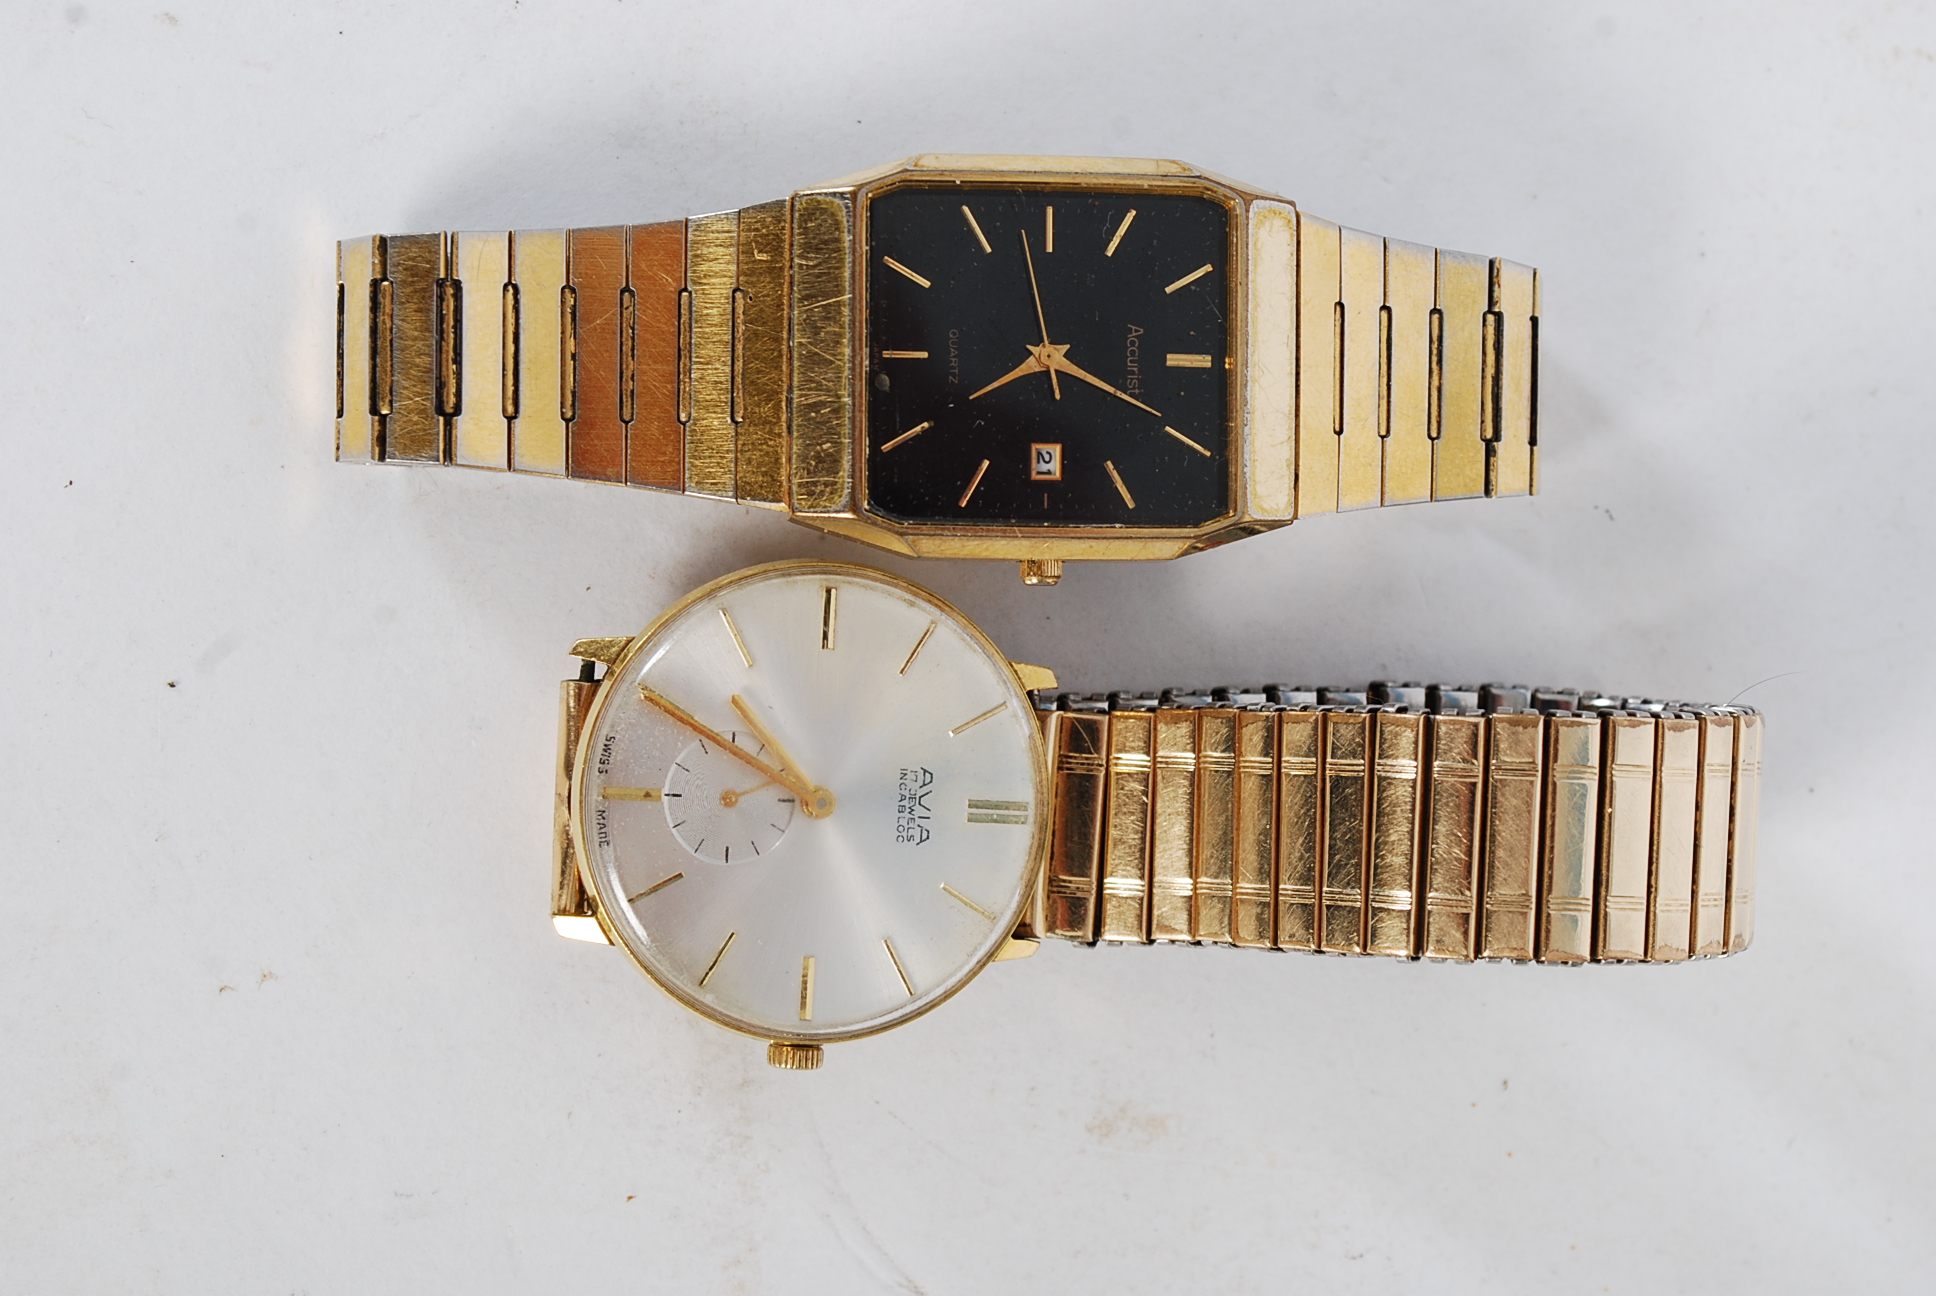 Aviva 17 jewel Incabloc wind up gents watch with  rolled gold bracelet along with another.